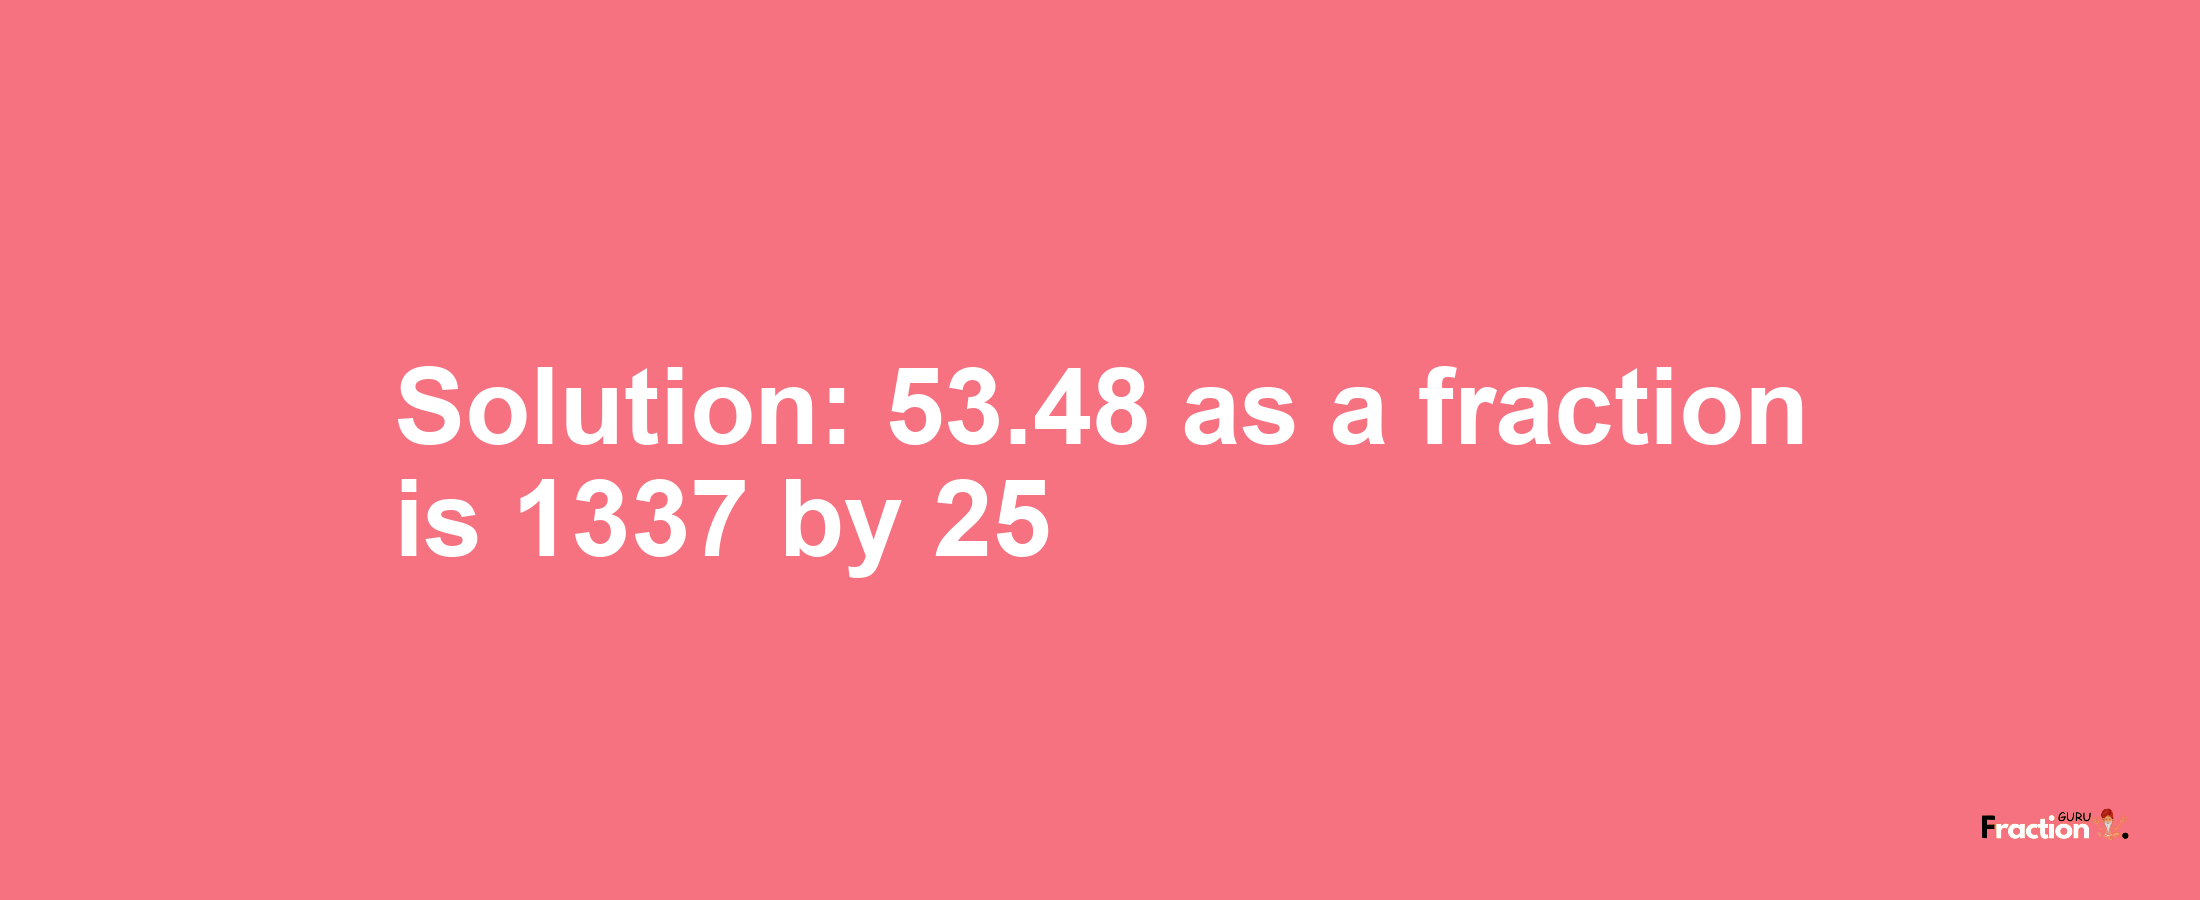 Solution:53.48 as a fraction is 1337/25